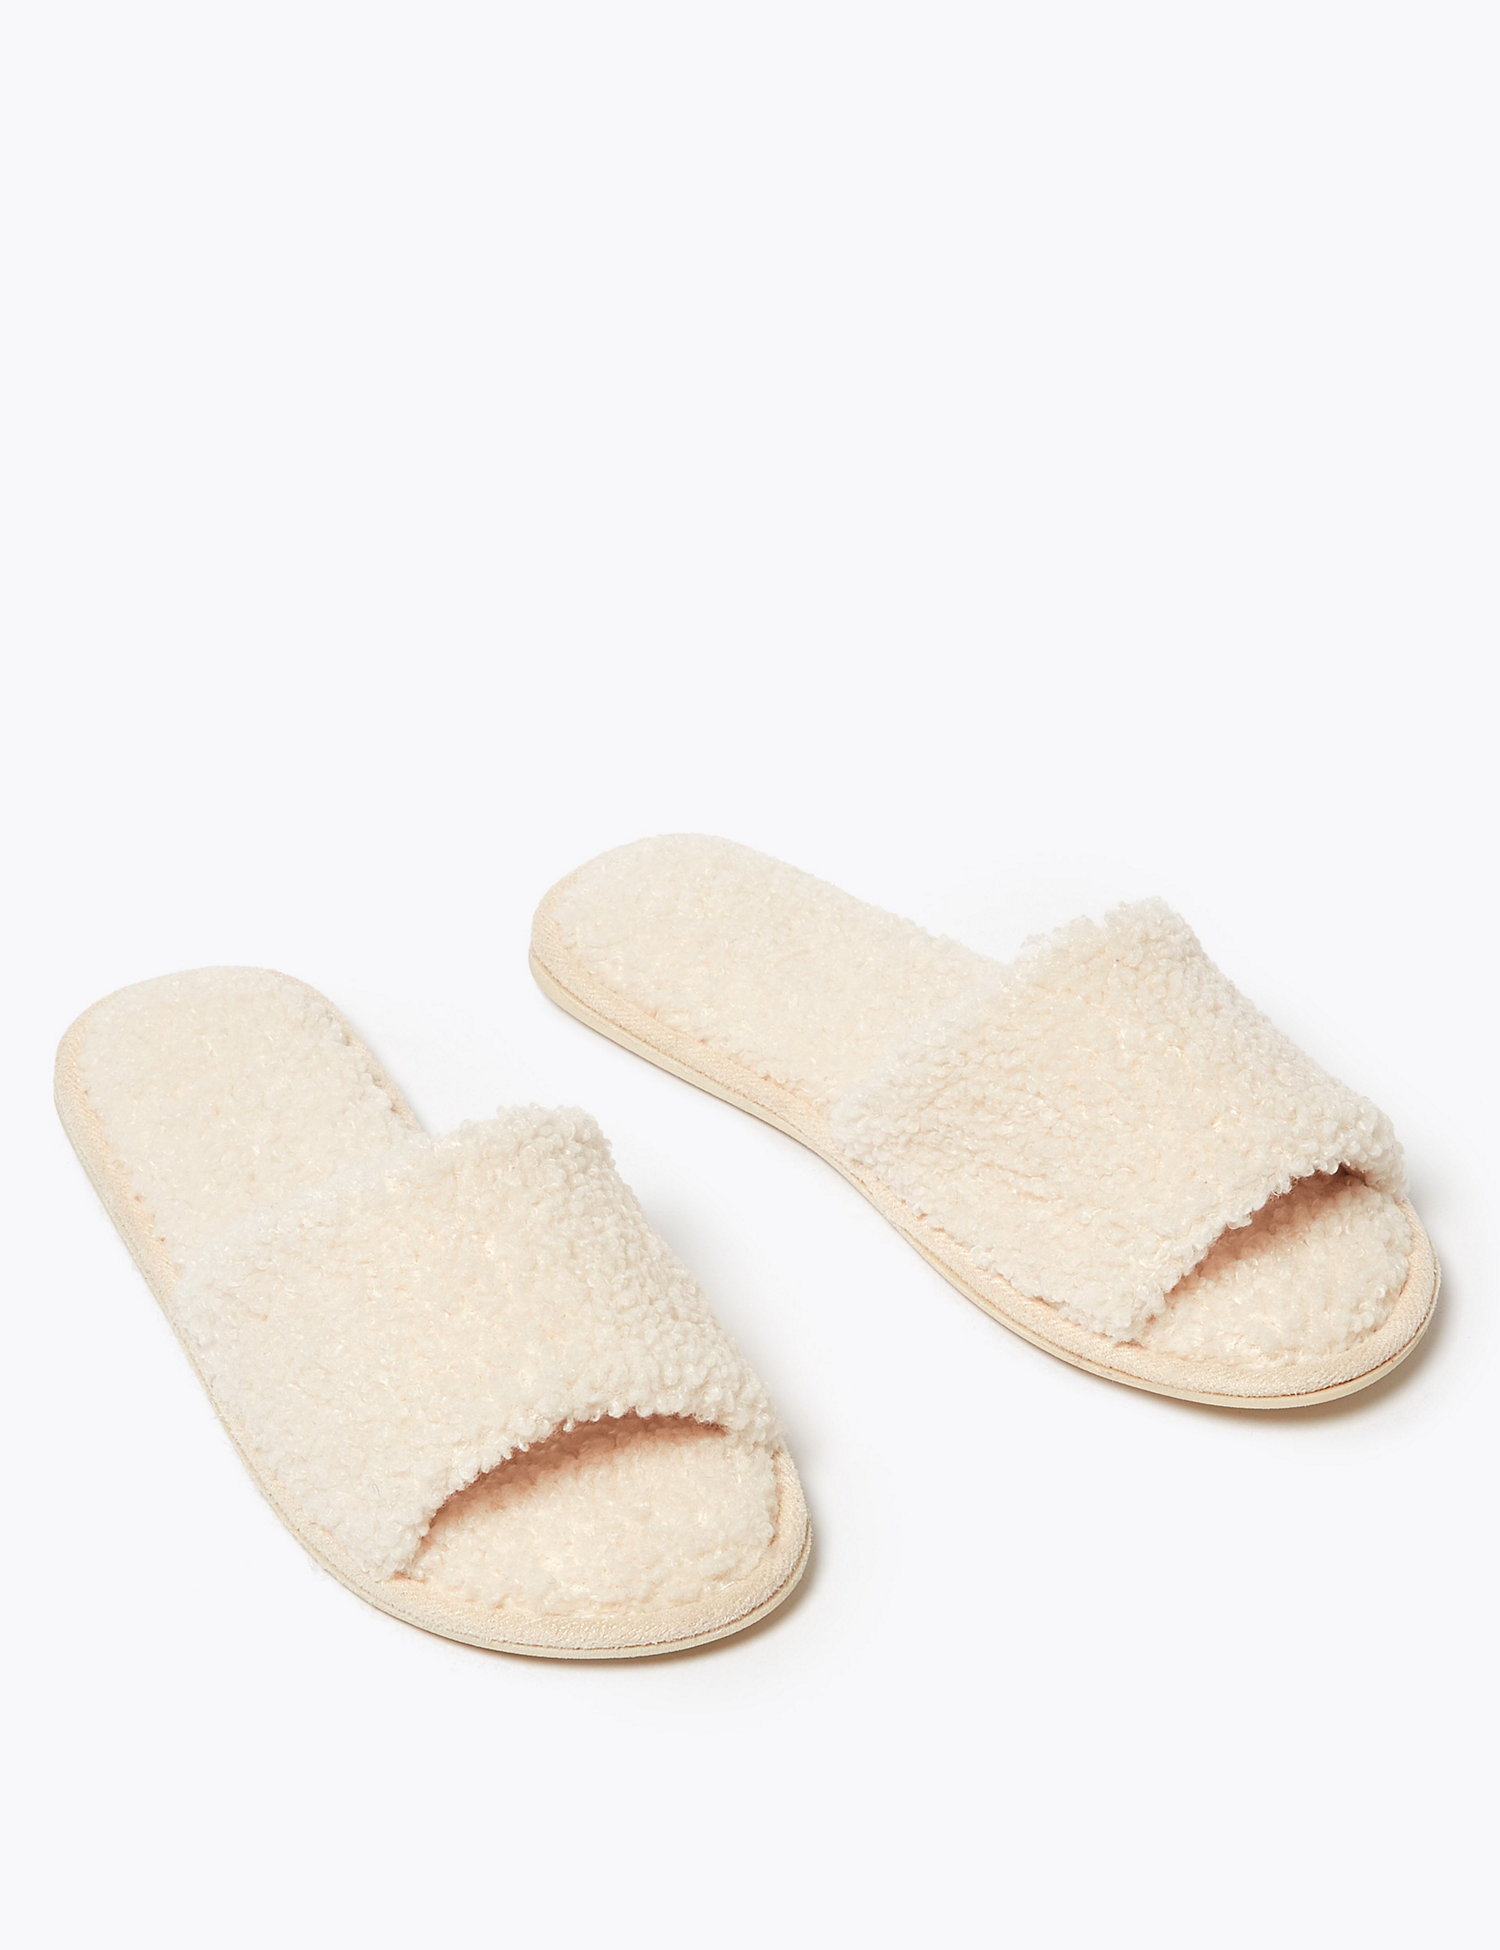 slippers similar to uggs